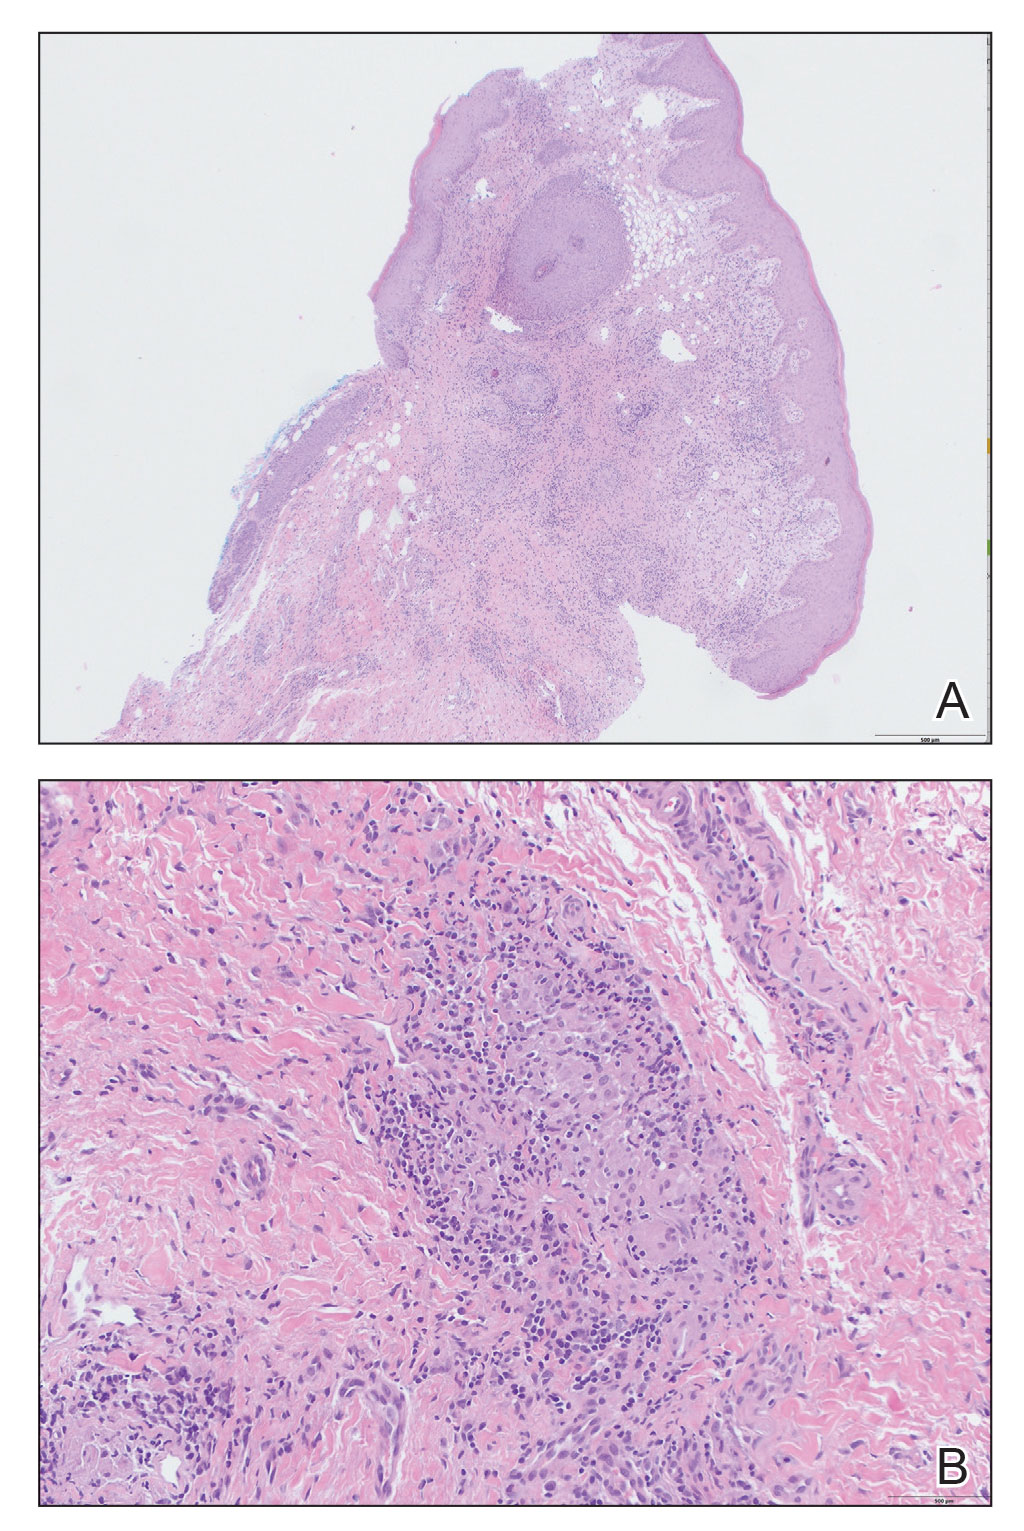 Histopathology of a biopsy from the right labia showed granulomatous dermatitis (H&E, original magnifications ×4 and ×20). Reference bars indicate 500 μm.